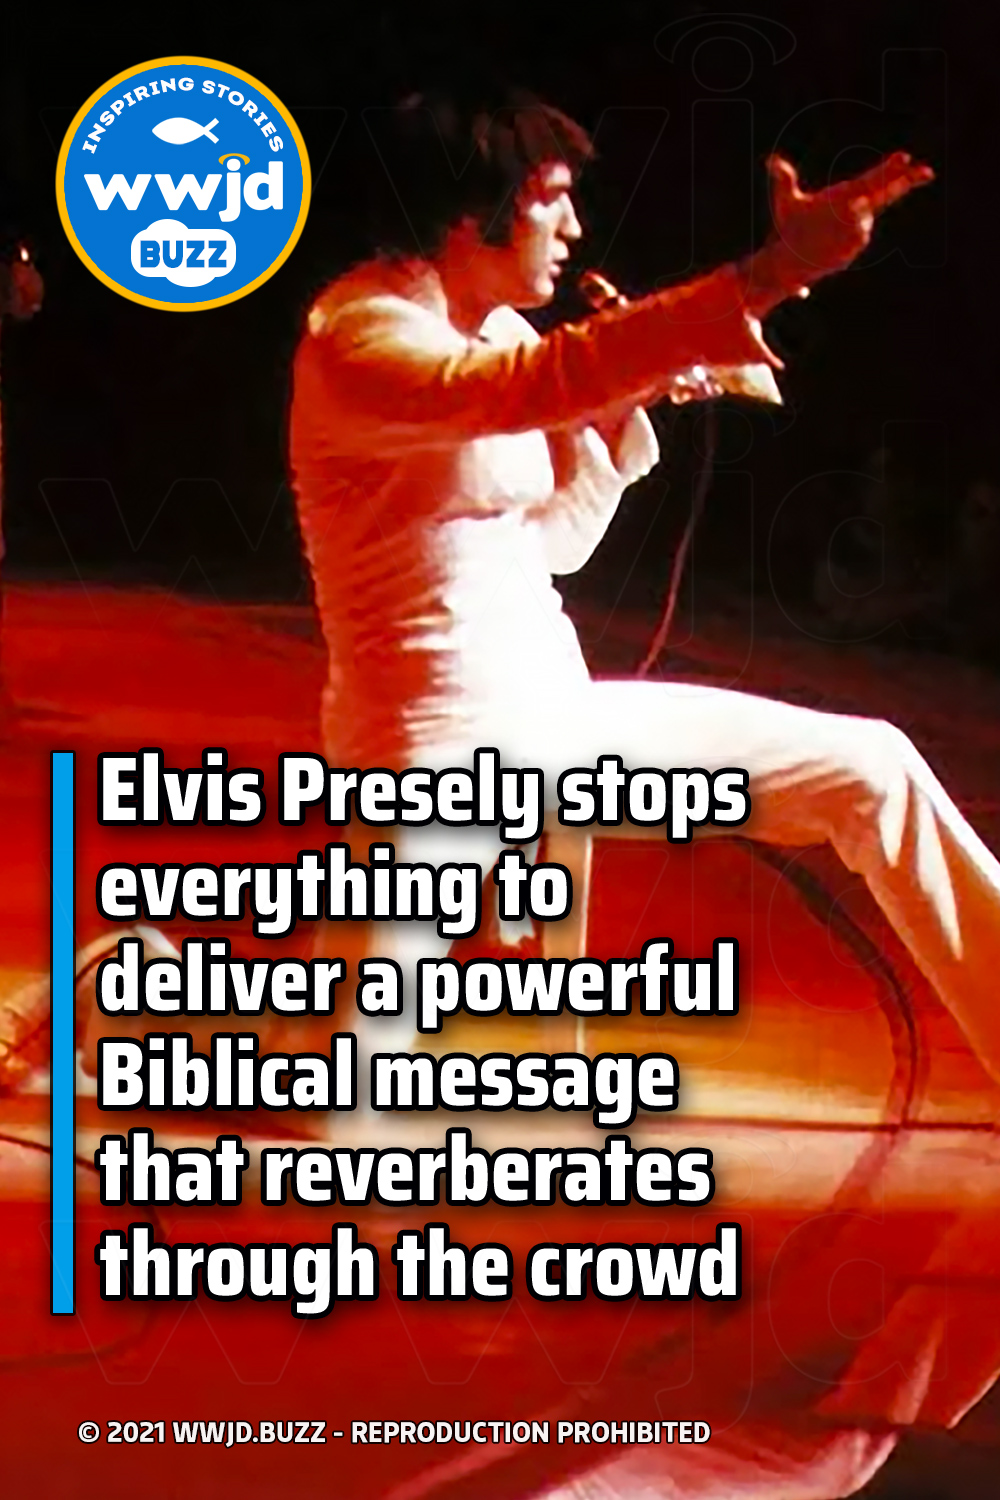 Elvis Presely stops everything to deliver a powerful Biblical message that reverberates through the crowd